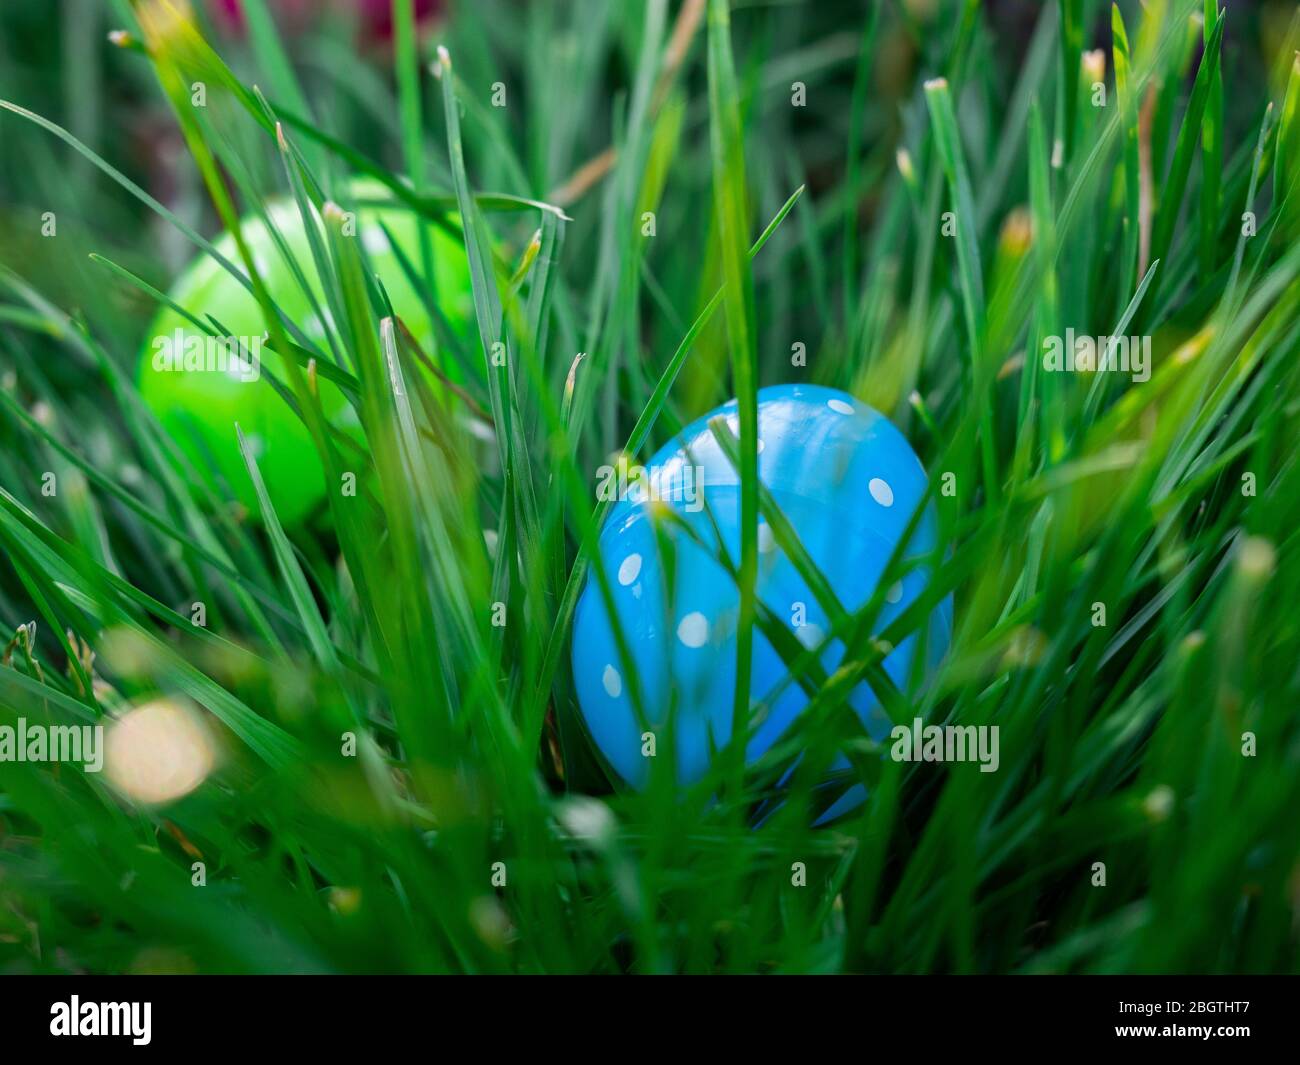 Blue and green polka dotted Easter eggs in grass waiting to be found on a sunny day Stock Photo